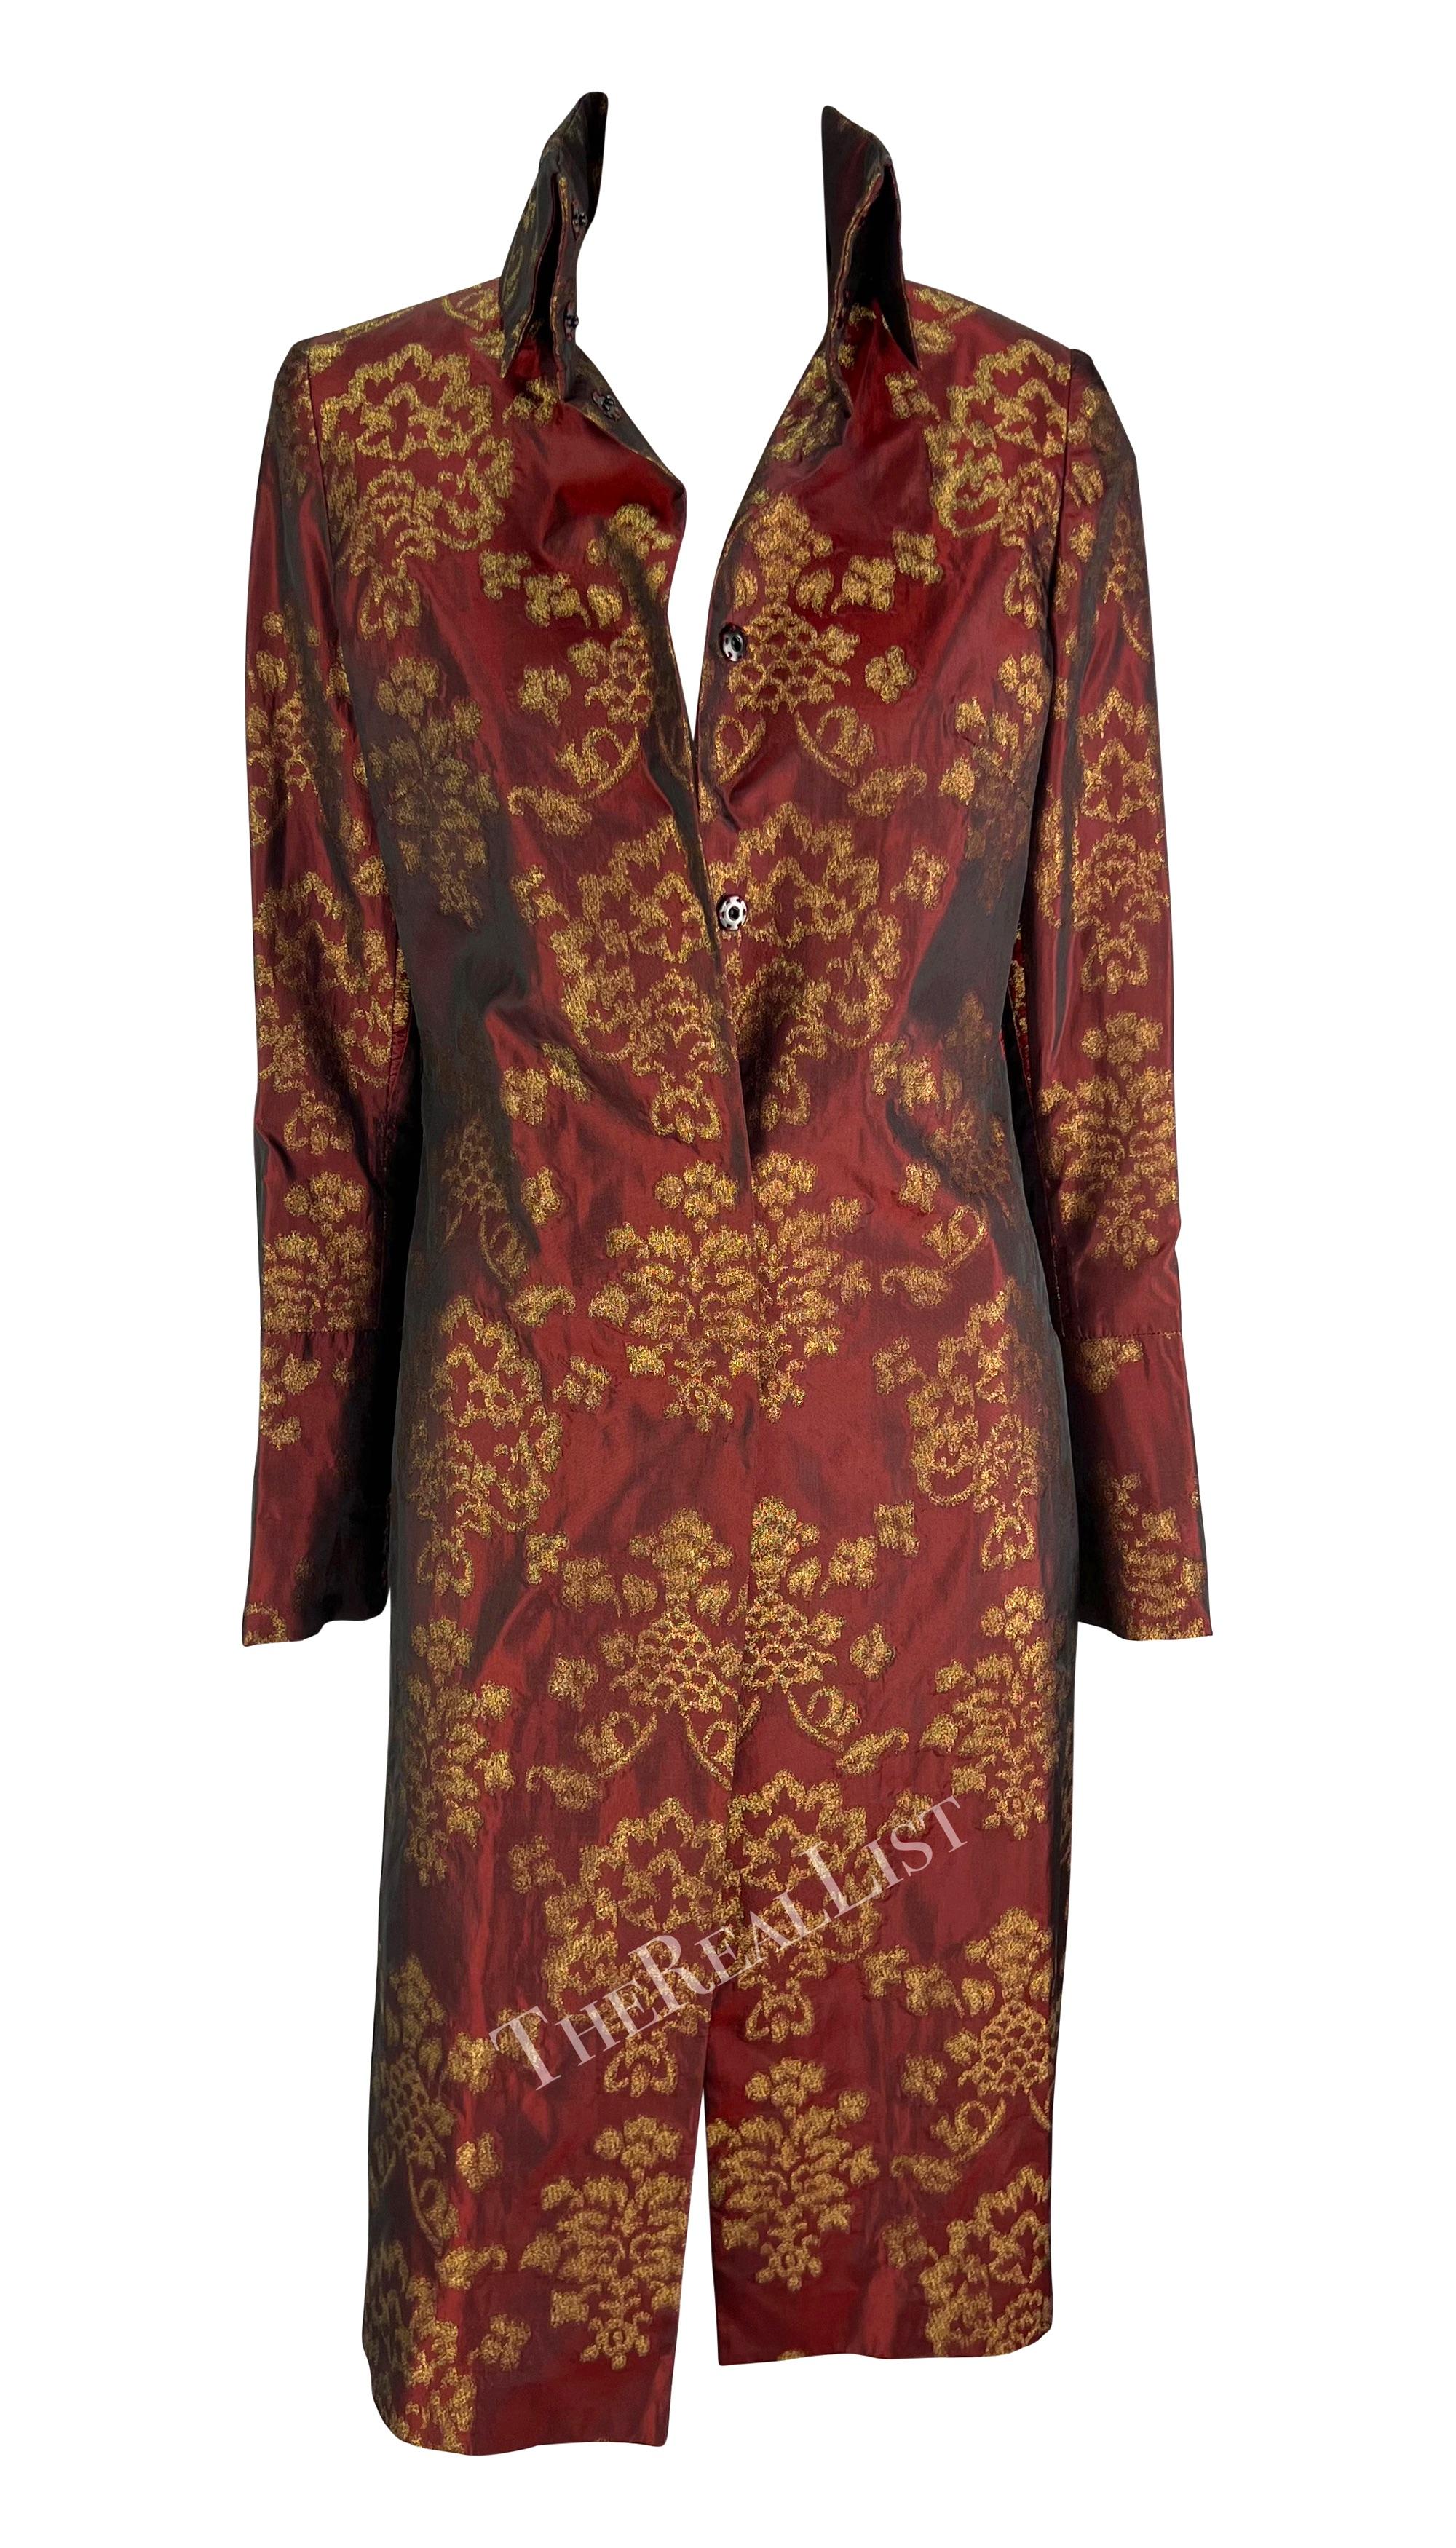 Presenting a fabulous burgundy jacquard silk Dolce & Gabbana knee-length coat. From the Spring/Summer 2000 collection, this chic coat is constructed entirely of burgundy satin jacquard with a beautiful gold-tone scroll pattern woven throughout. This